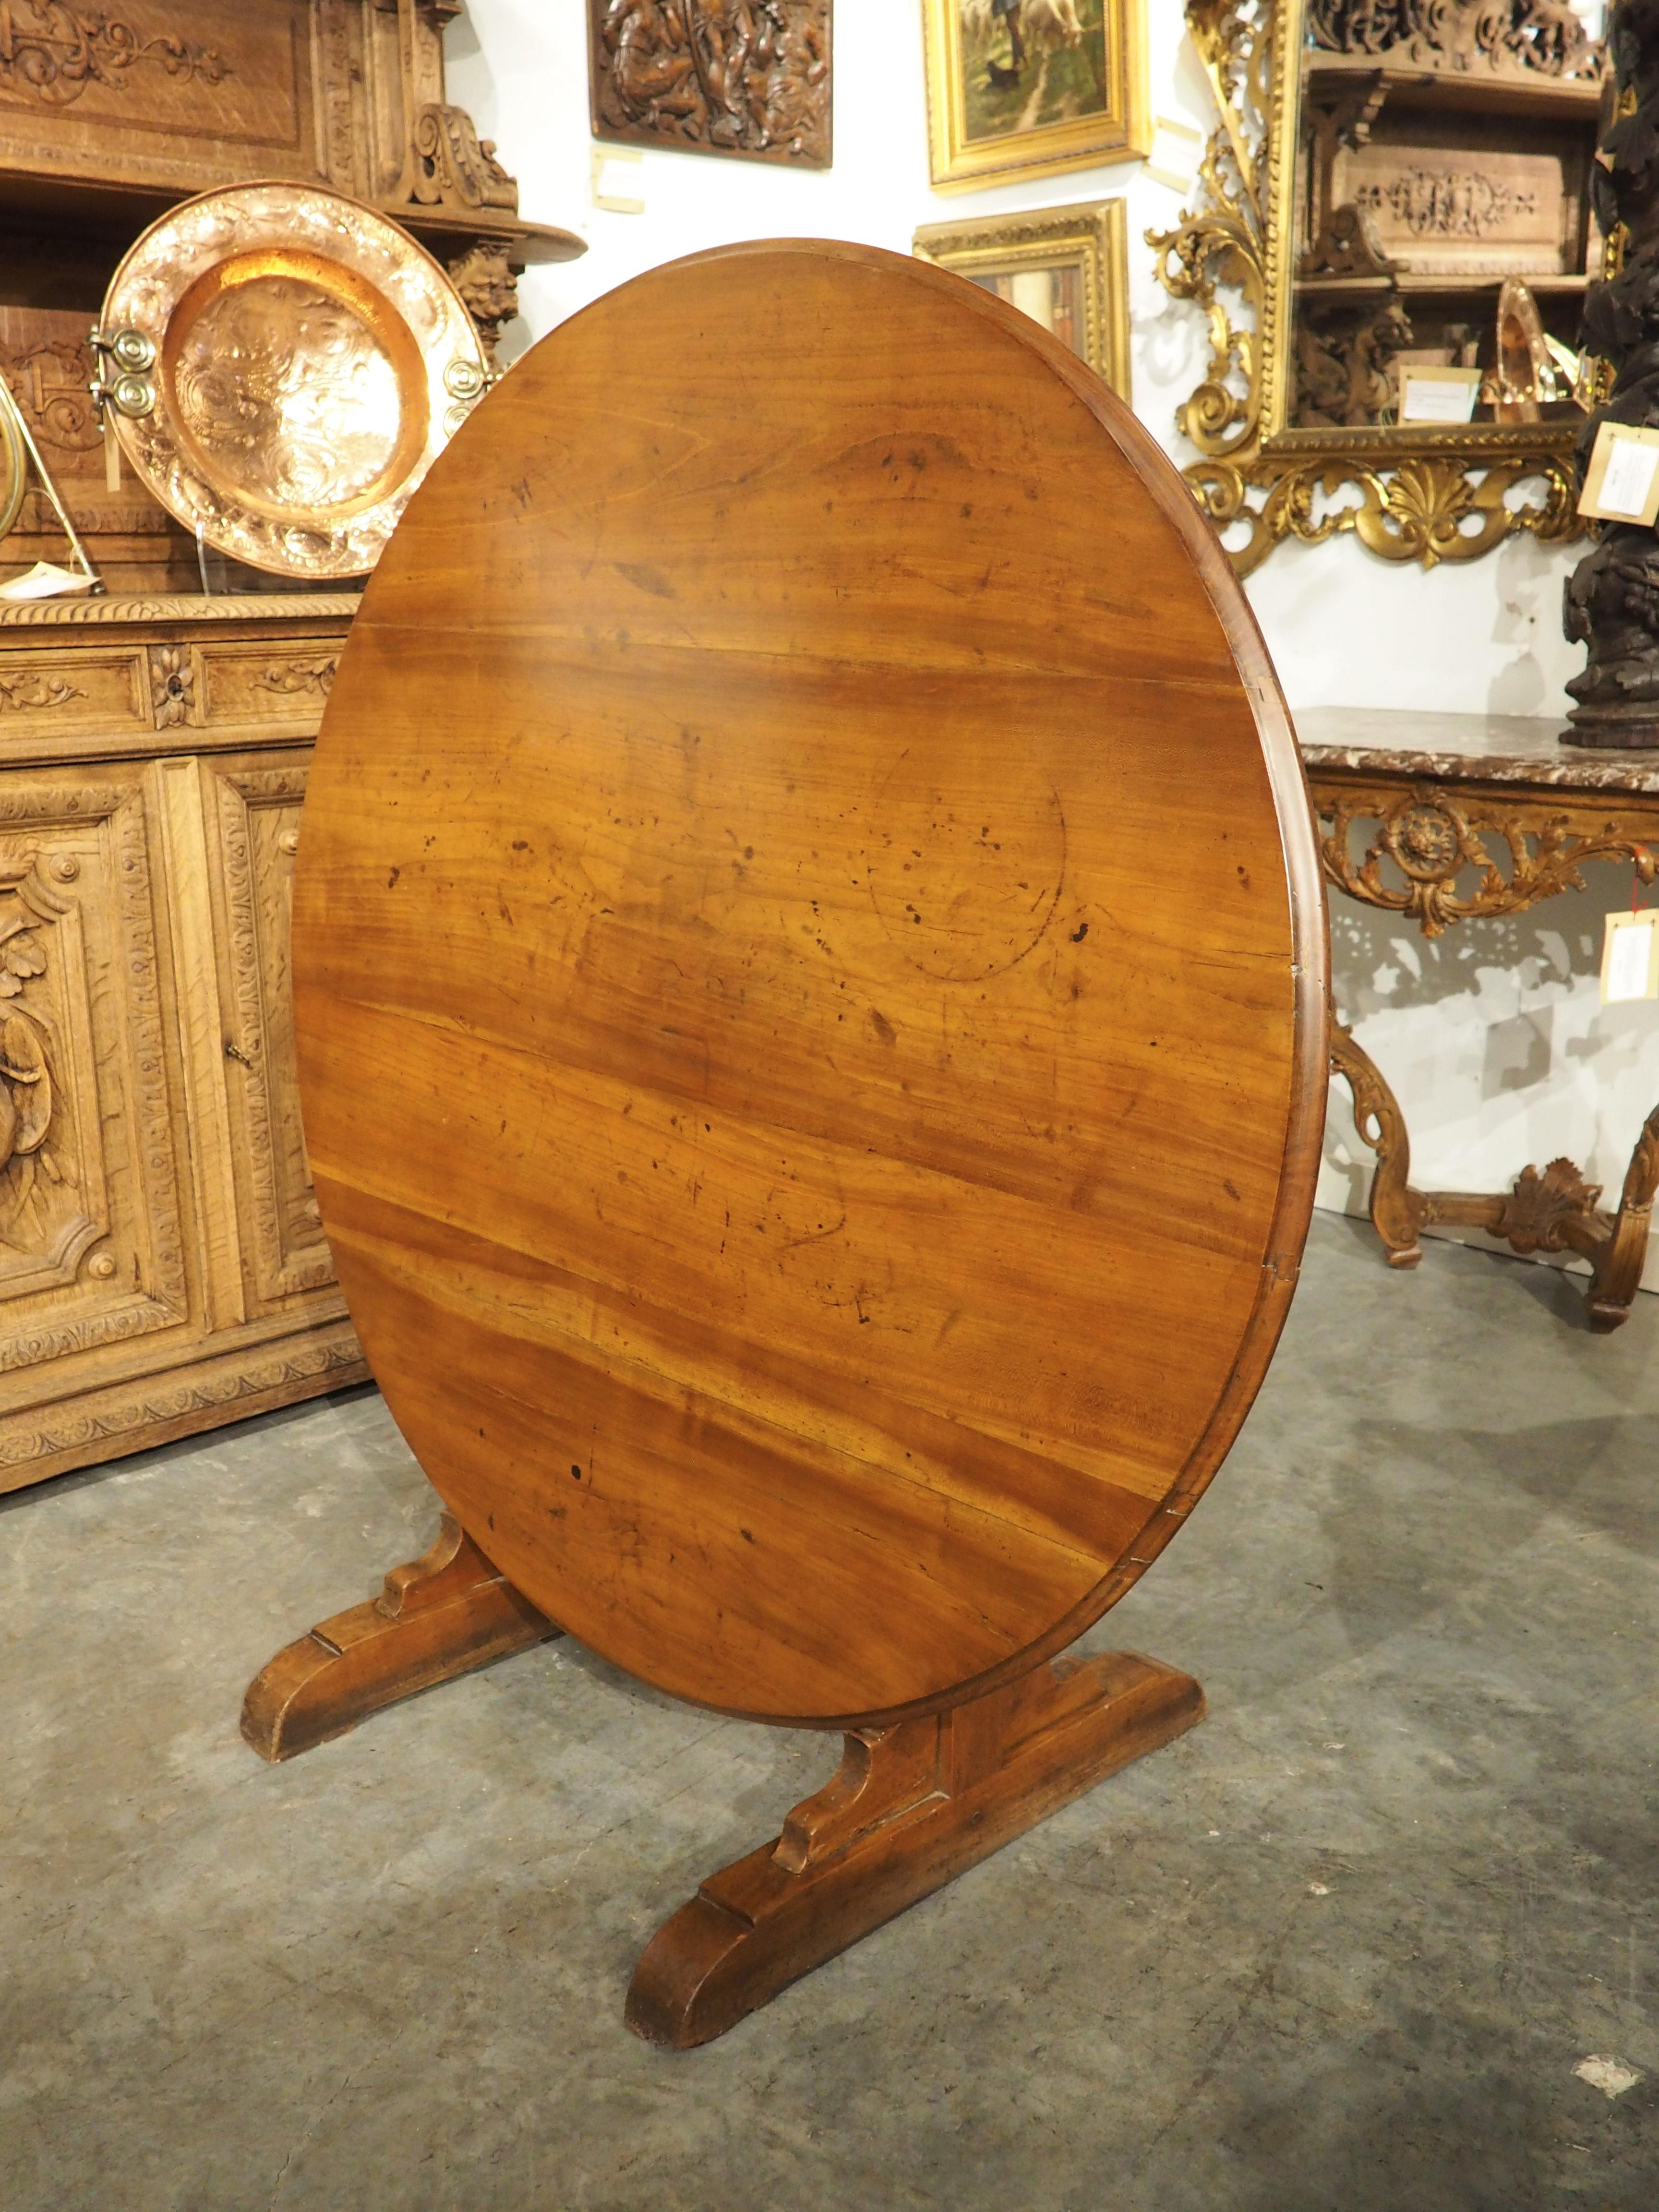 Known as a vintner’s table, this beautiful tilt-top wine-tasting table would have been used at a French vineyard during the 1800s. Hand-carved from fruitwood, the robust round top is adorned with a cavetto molding. It is supported by a pair of thick